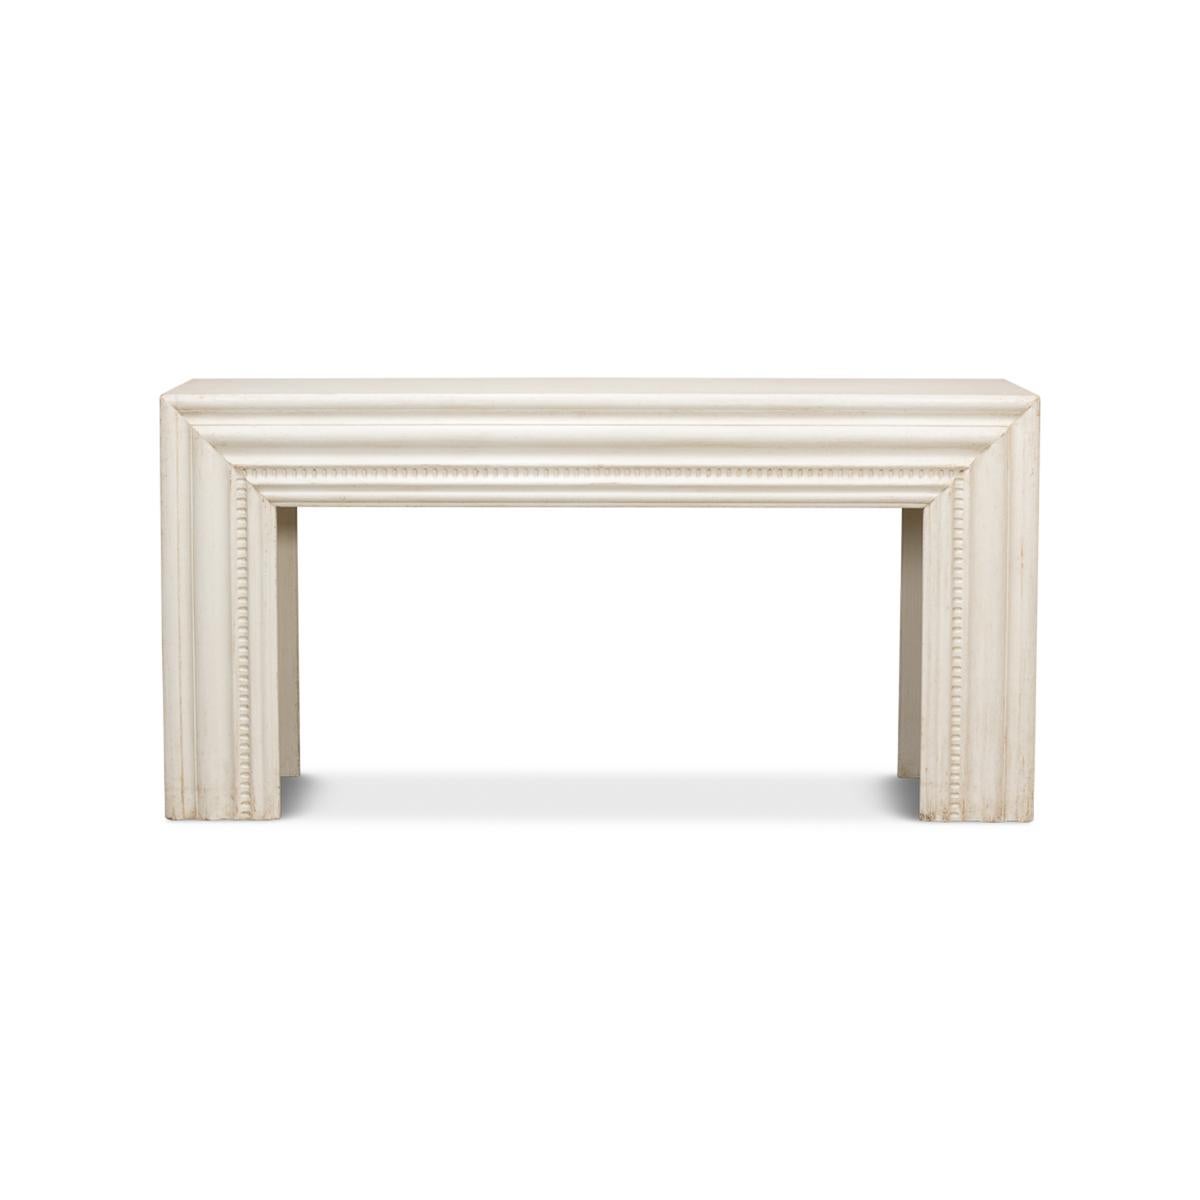 Traditional Antiqued white painted mantel console table. Made with reclaimed pine with a bold frame having molded architectural elements and dental moldings. Reminiscent of an 18th-century antique mantel.

Dimensions: 72